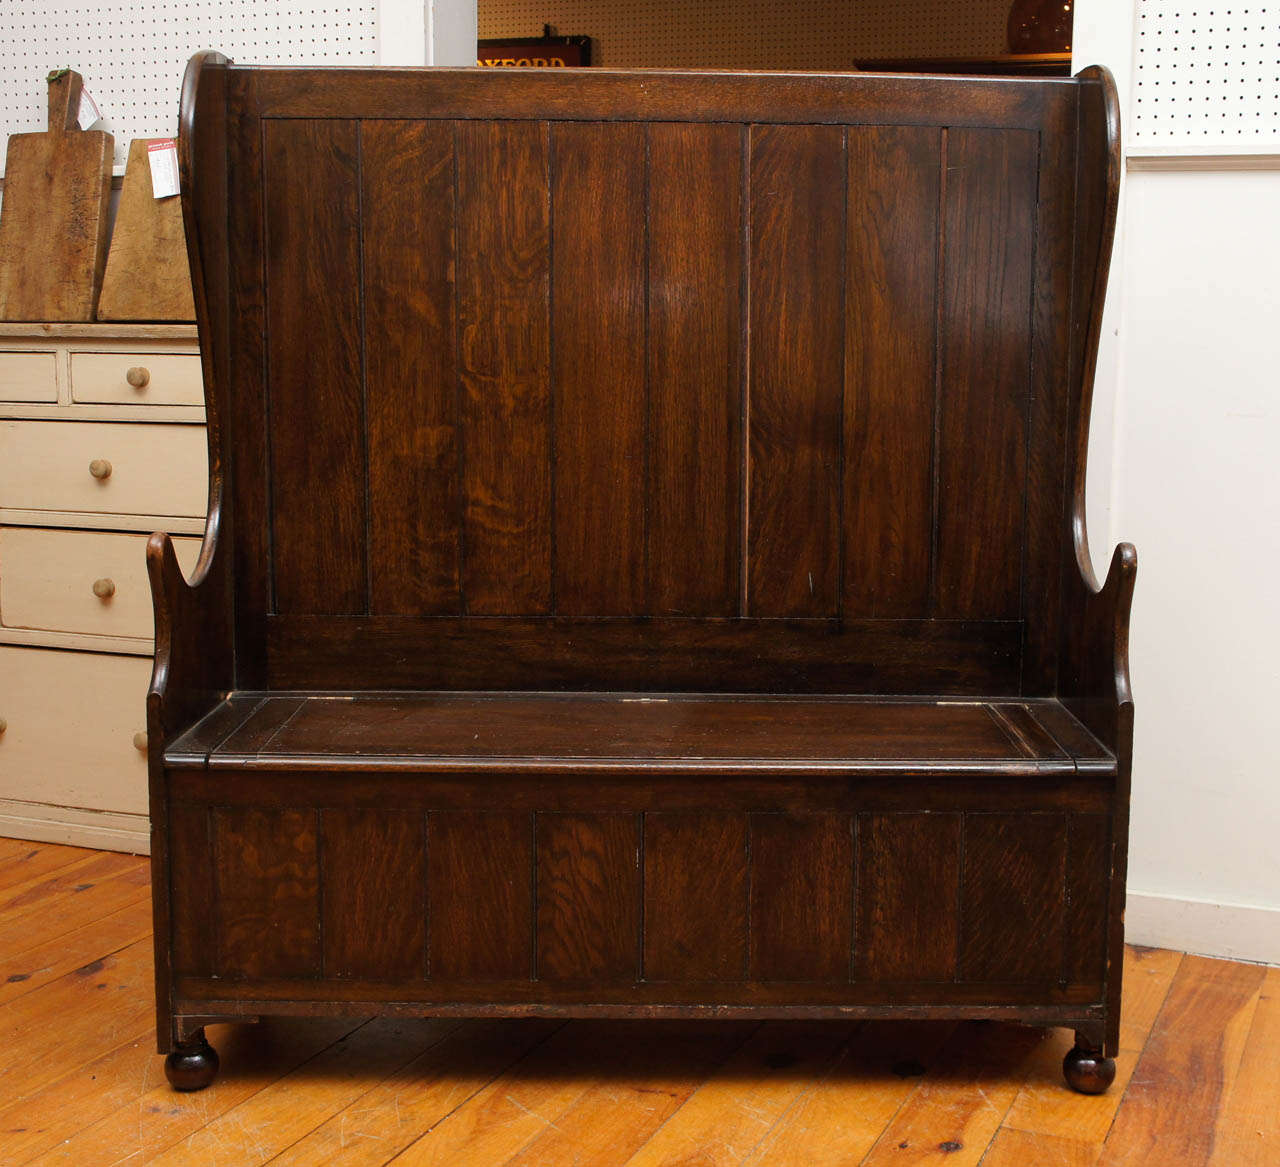 Tall dark and very handsome is the perfect way to describe this wonderful oak box seat settle. Its high back caught the warm heat of the fire in an English pub around 1860. The sides are gracefully curved as well as the arms. The seat lifts to a